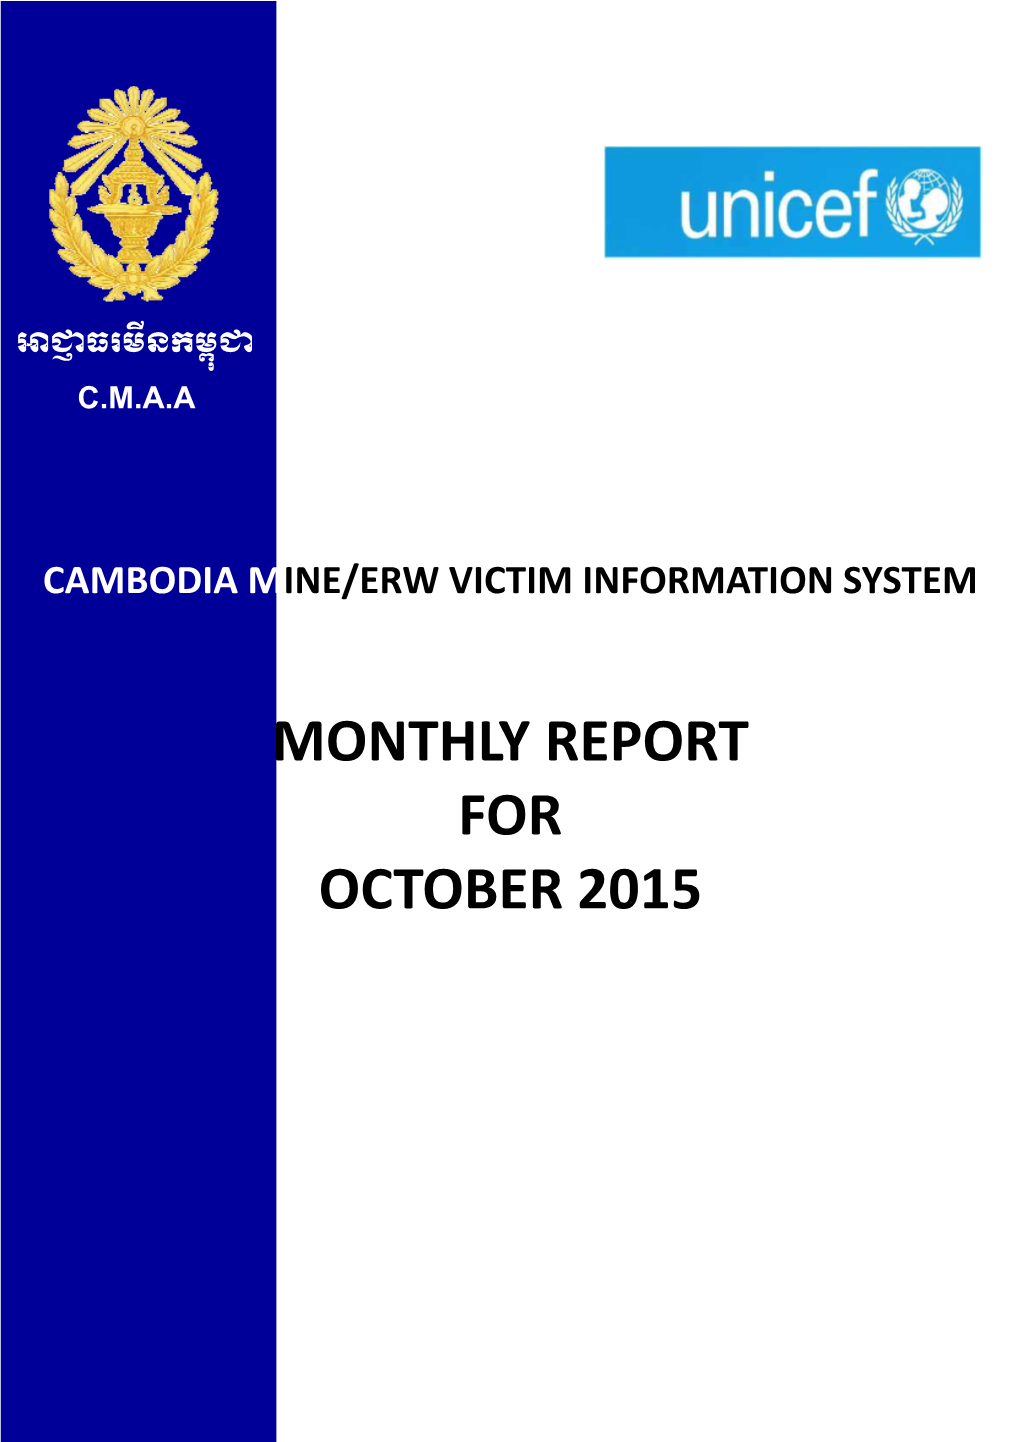 Monthly Report for October 2015